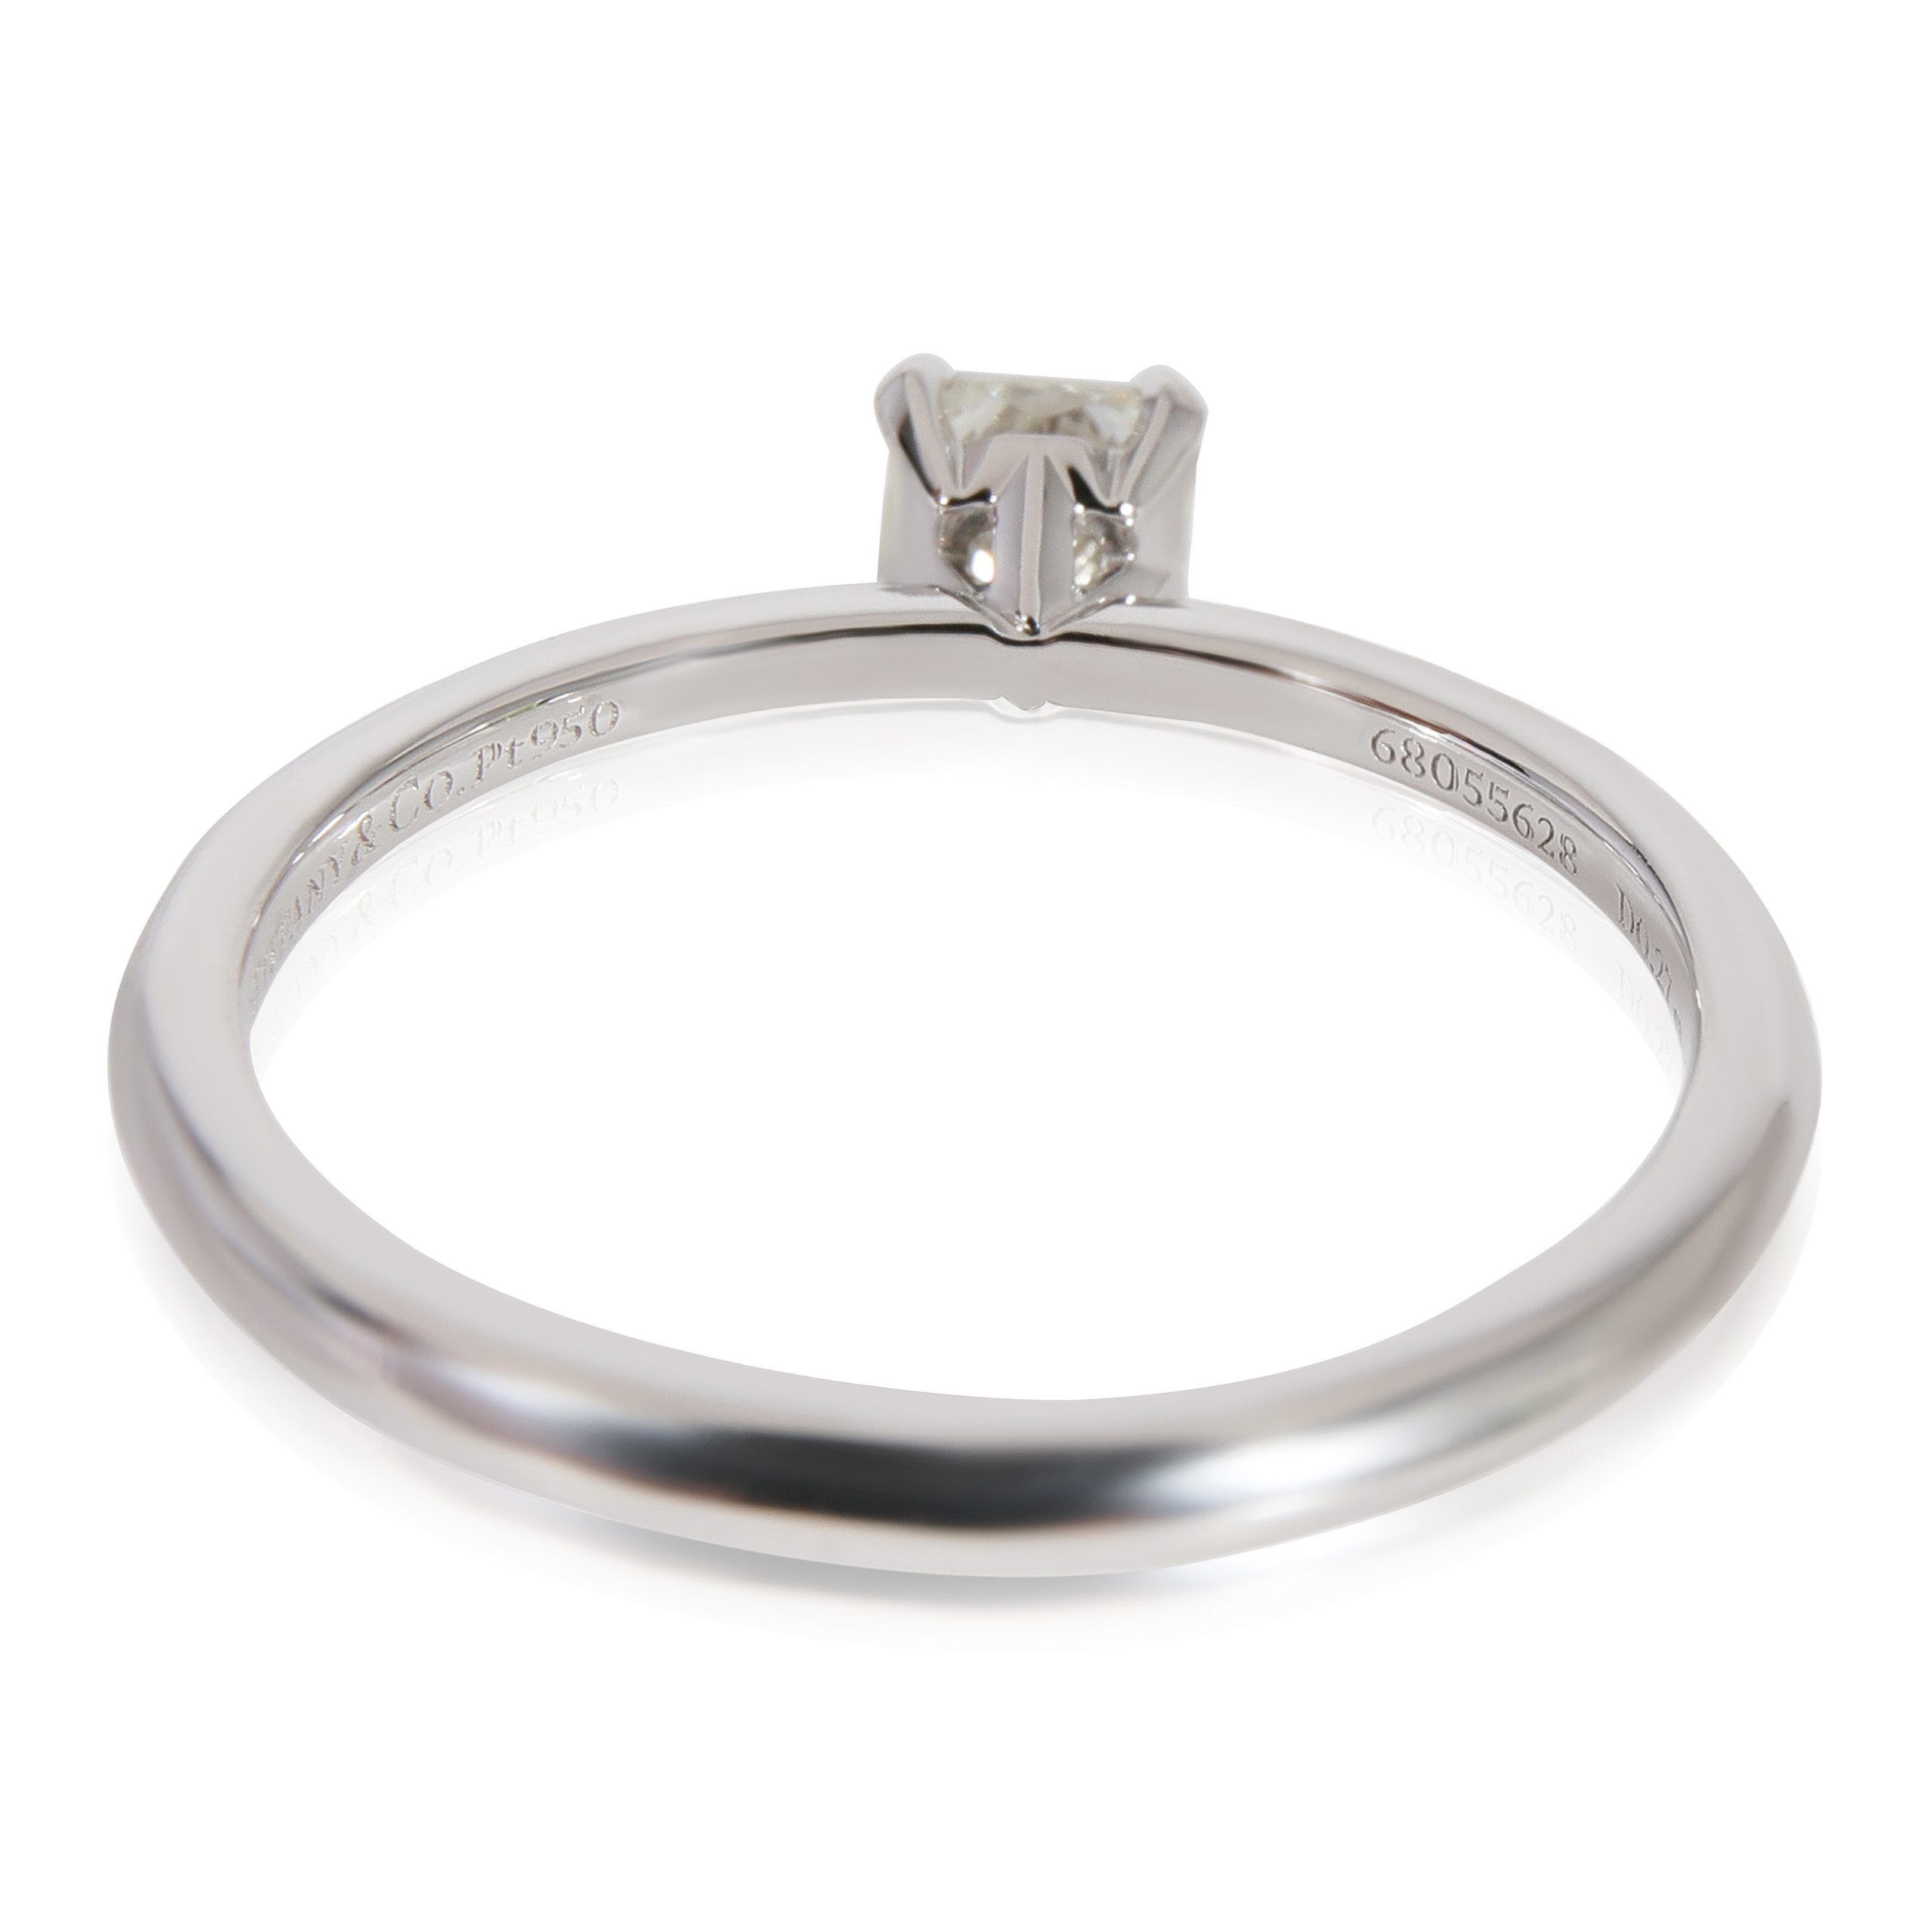 Tiffany & Co. Tiffany & Co. Diamond Solitaire Engagement Ring in Platinum I VS1 0.27 CTW Size ONE SIZE - 3 Thumbnail